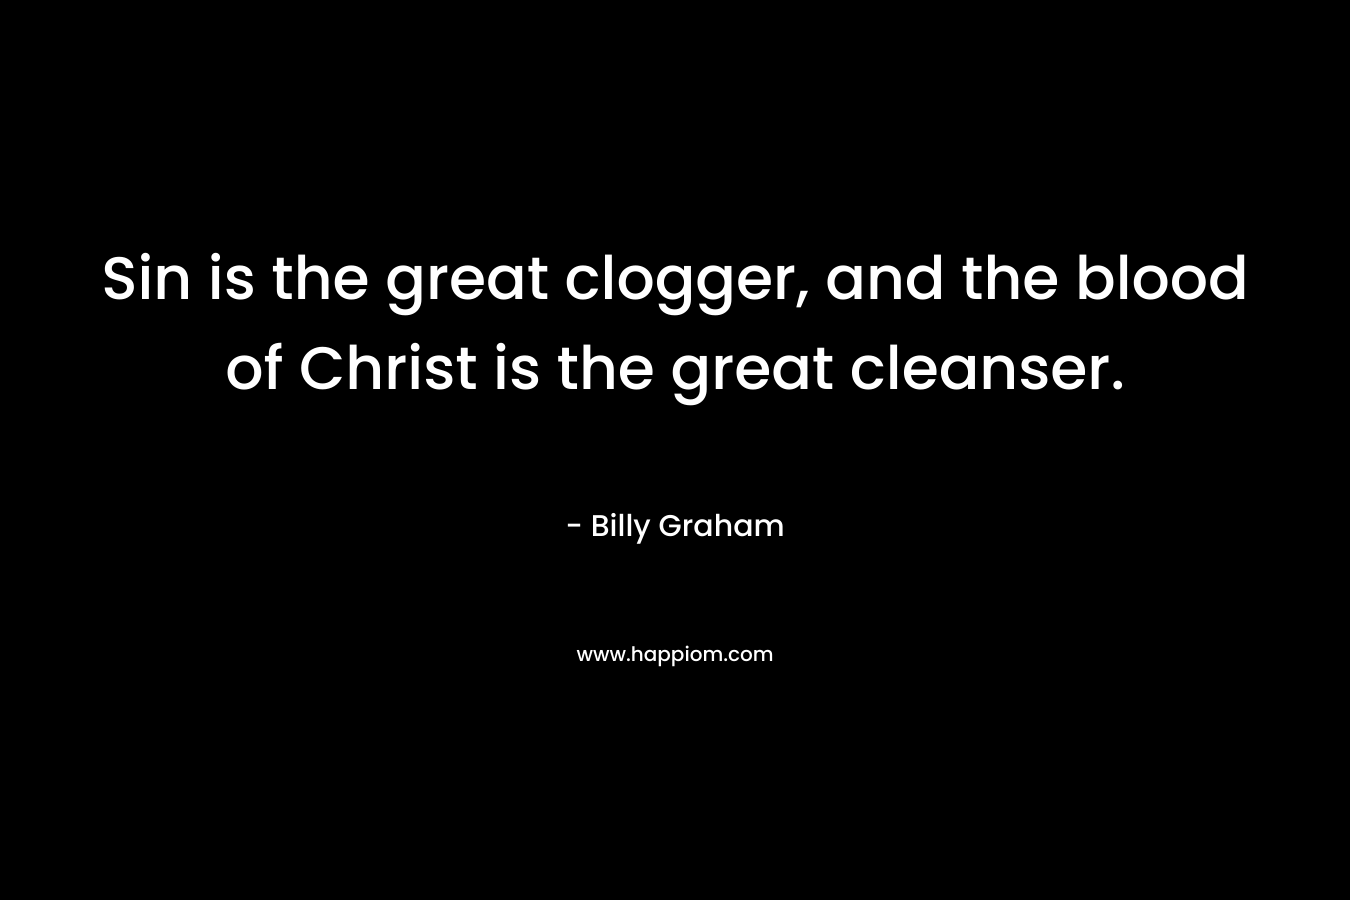 Sin is the great clogger, and the blood of Christ is the great cleanser.